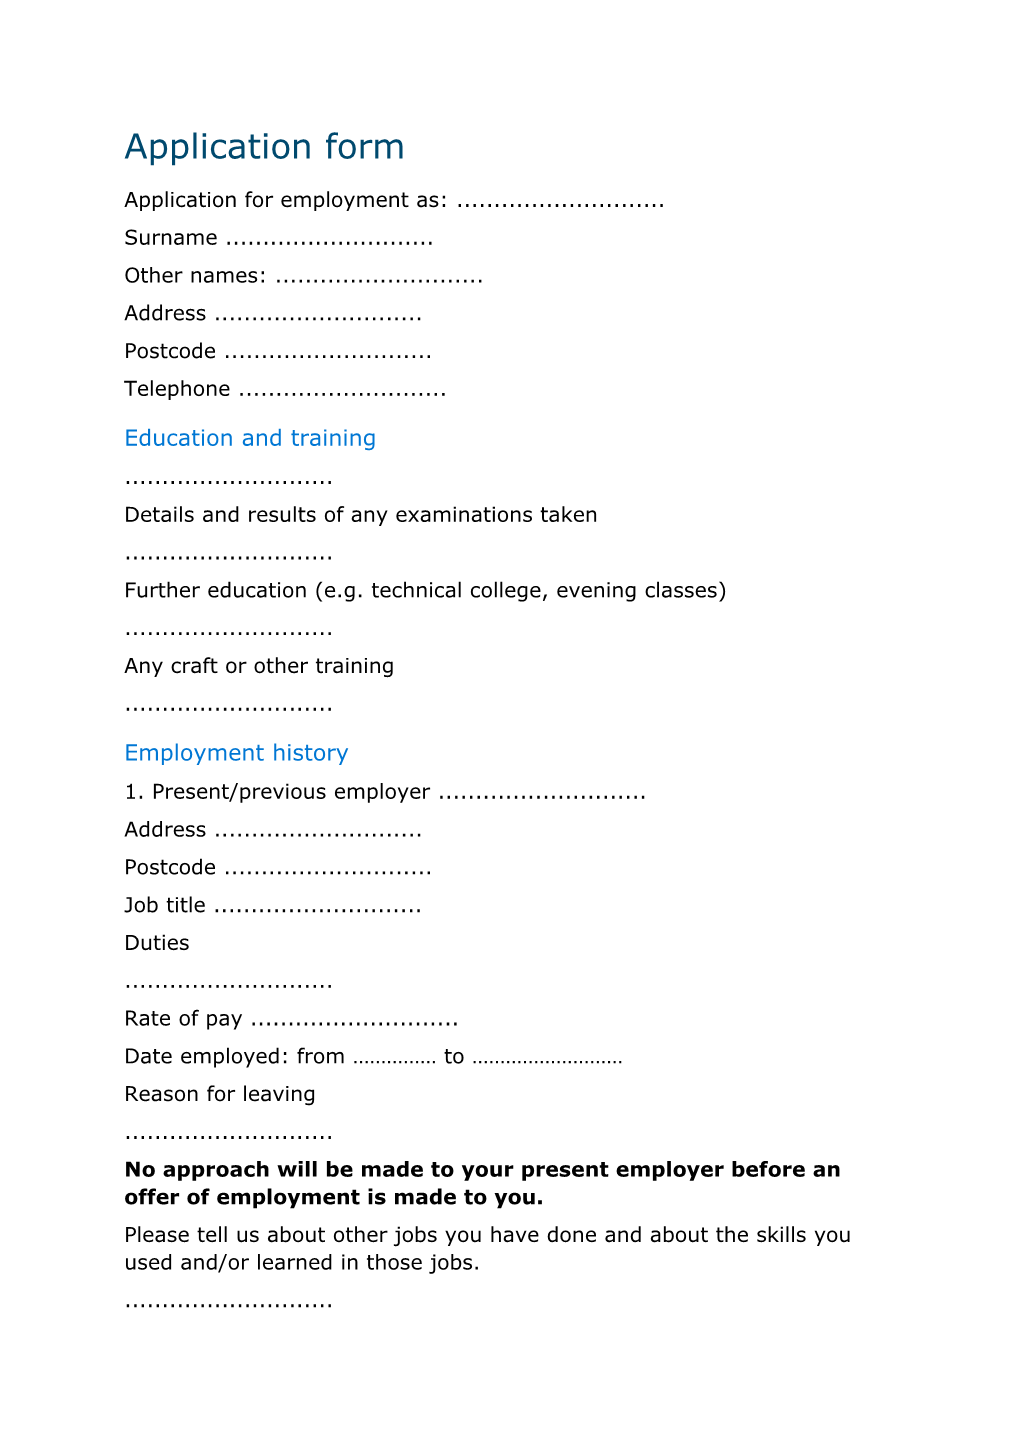 Application Form s3